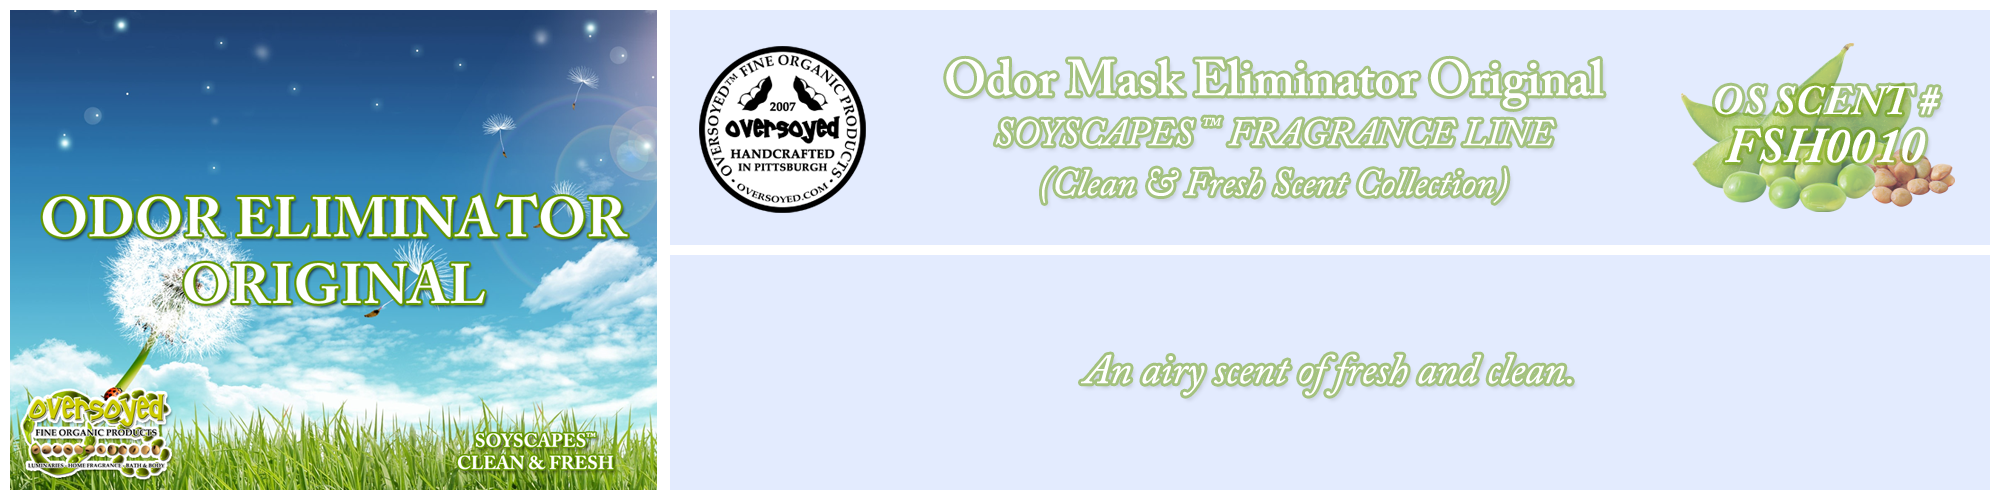 Odor Mask Eliminator Original Handcrafted Products Collection